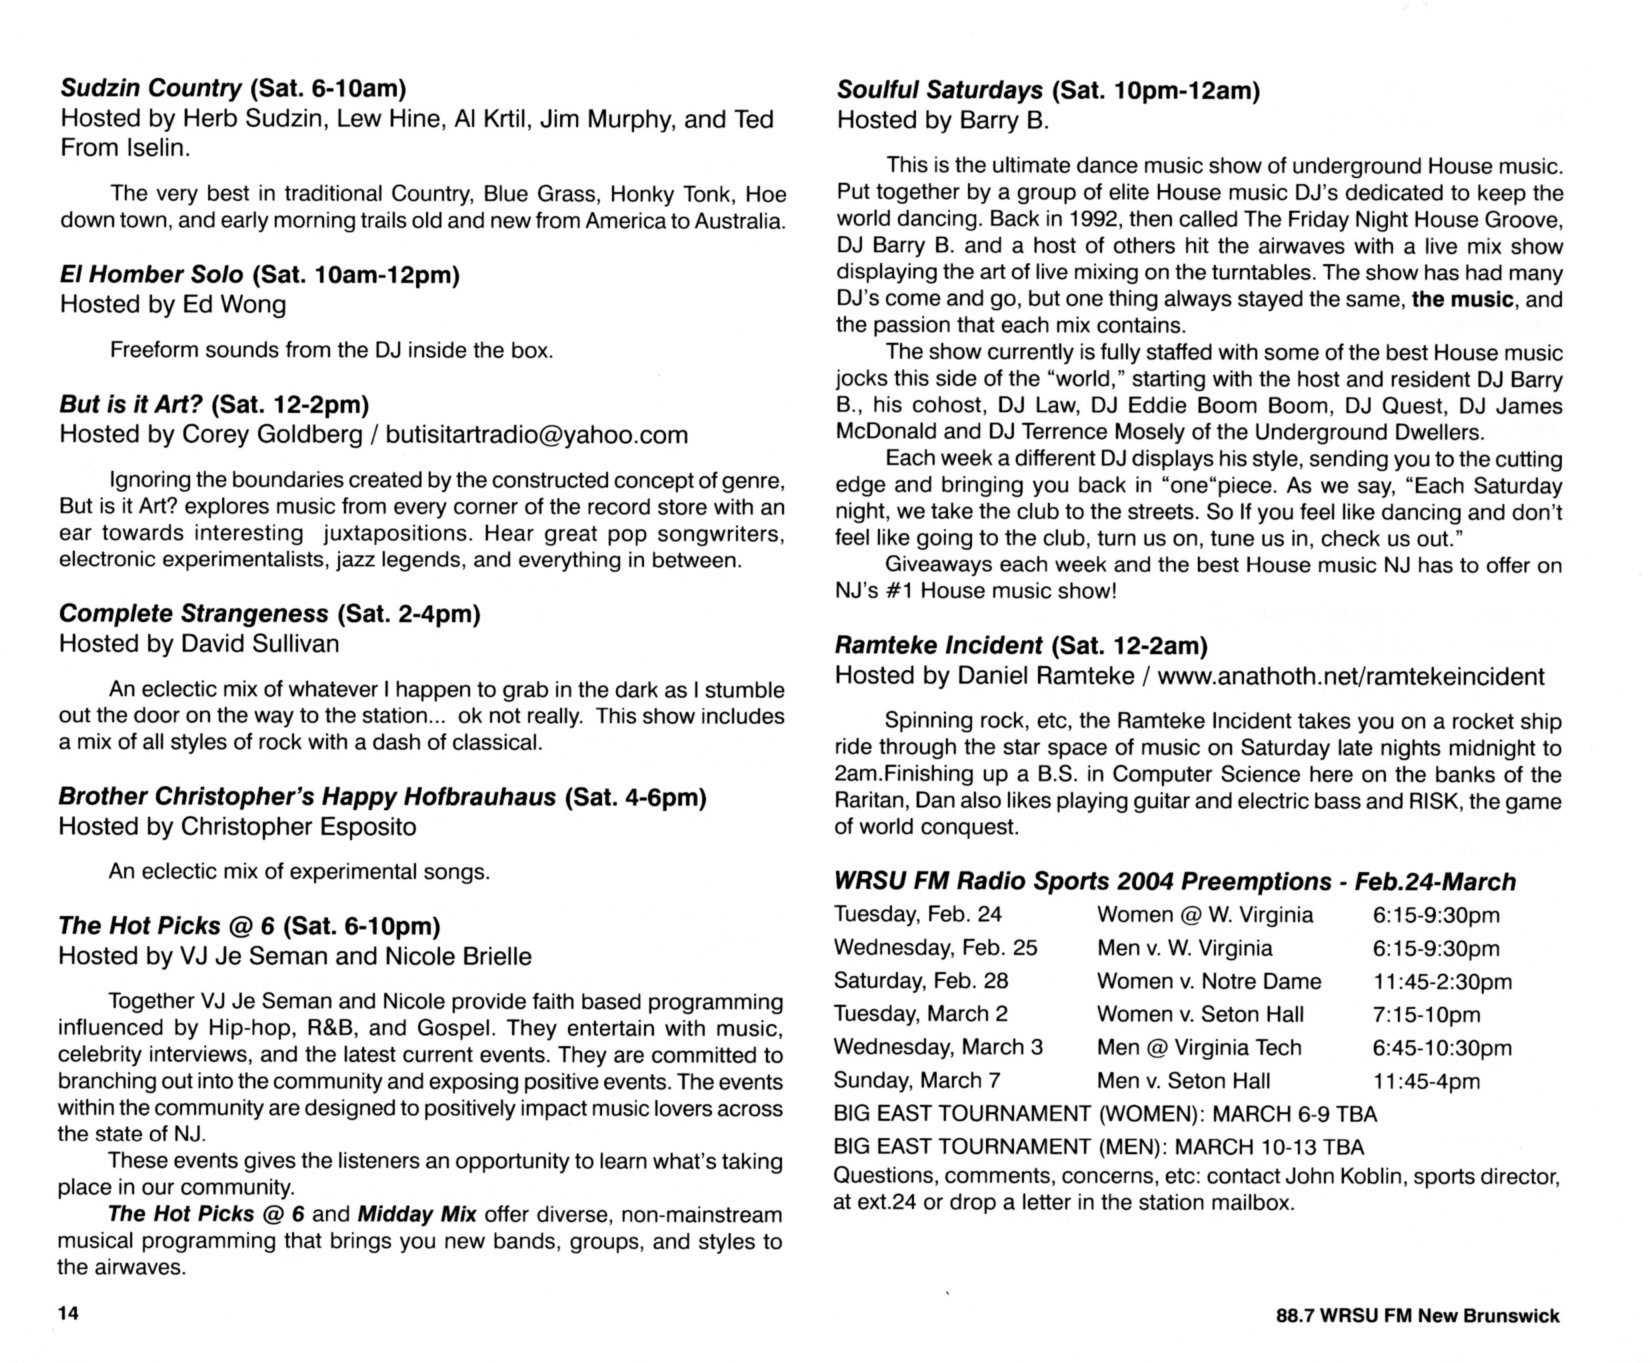 2004 - Program Guide Page 15